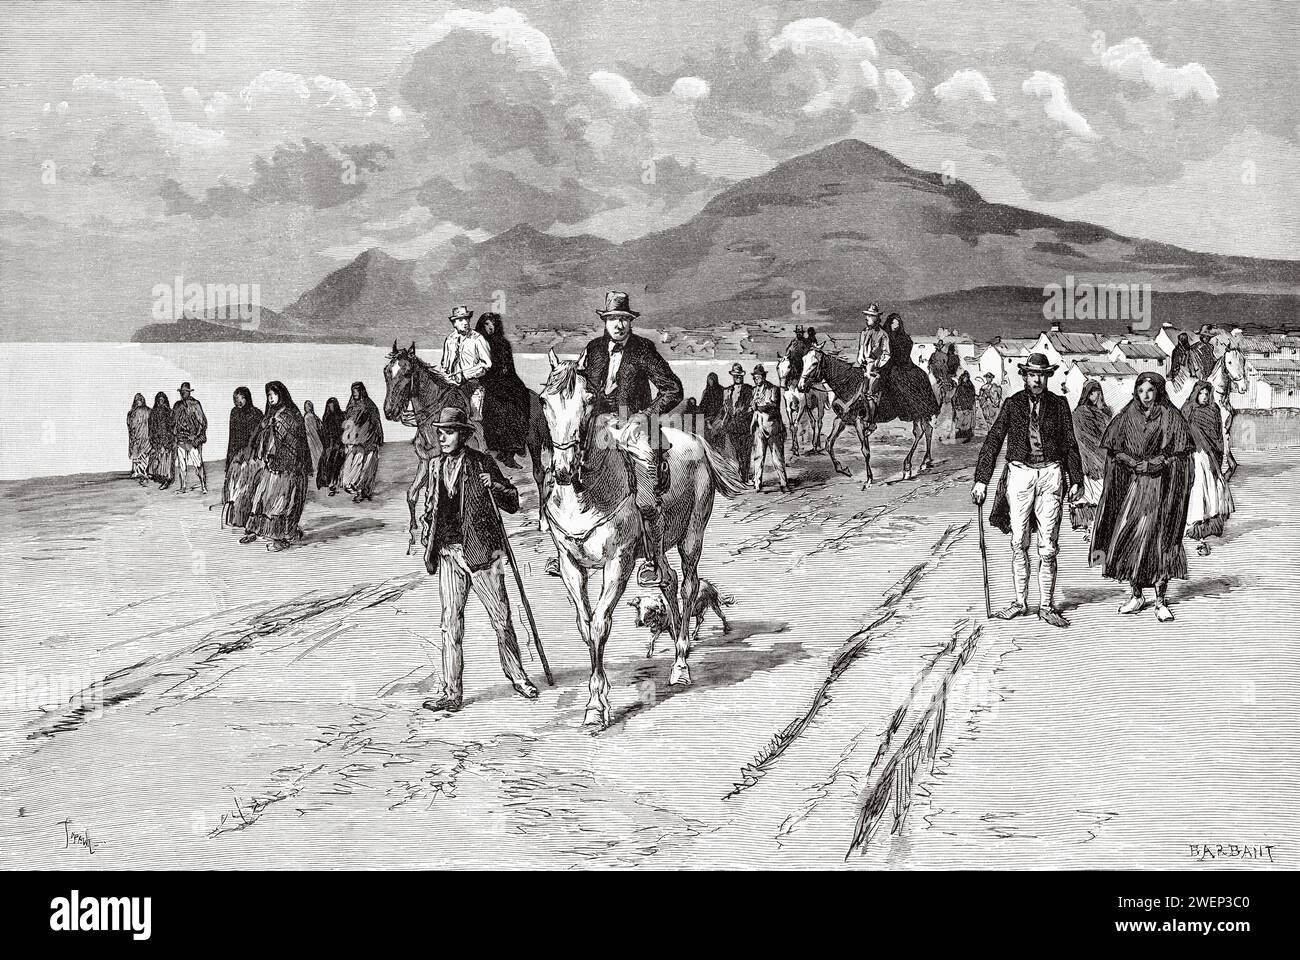 Islanders going to mass, County Mayo, Republic of Ireland. Three Months In Ireland By Miss Marie Anne De Bovet (1855 - 1935) Limerick and the Clare Coast 1889 Stock Photo